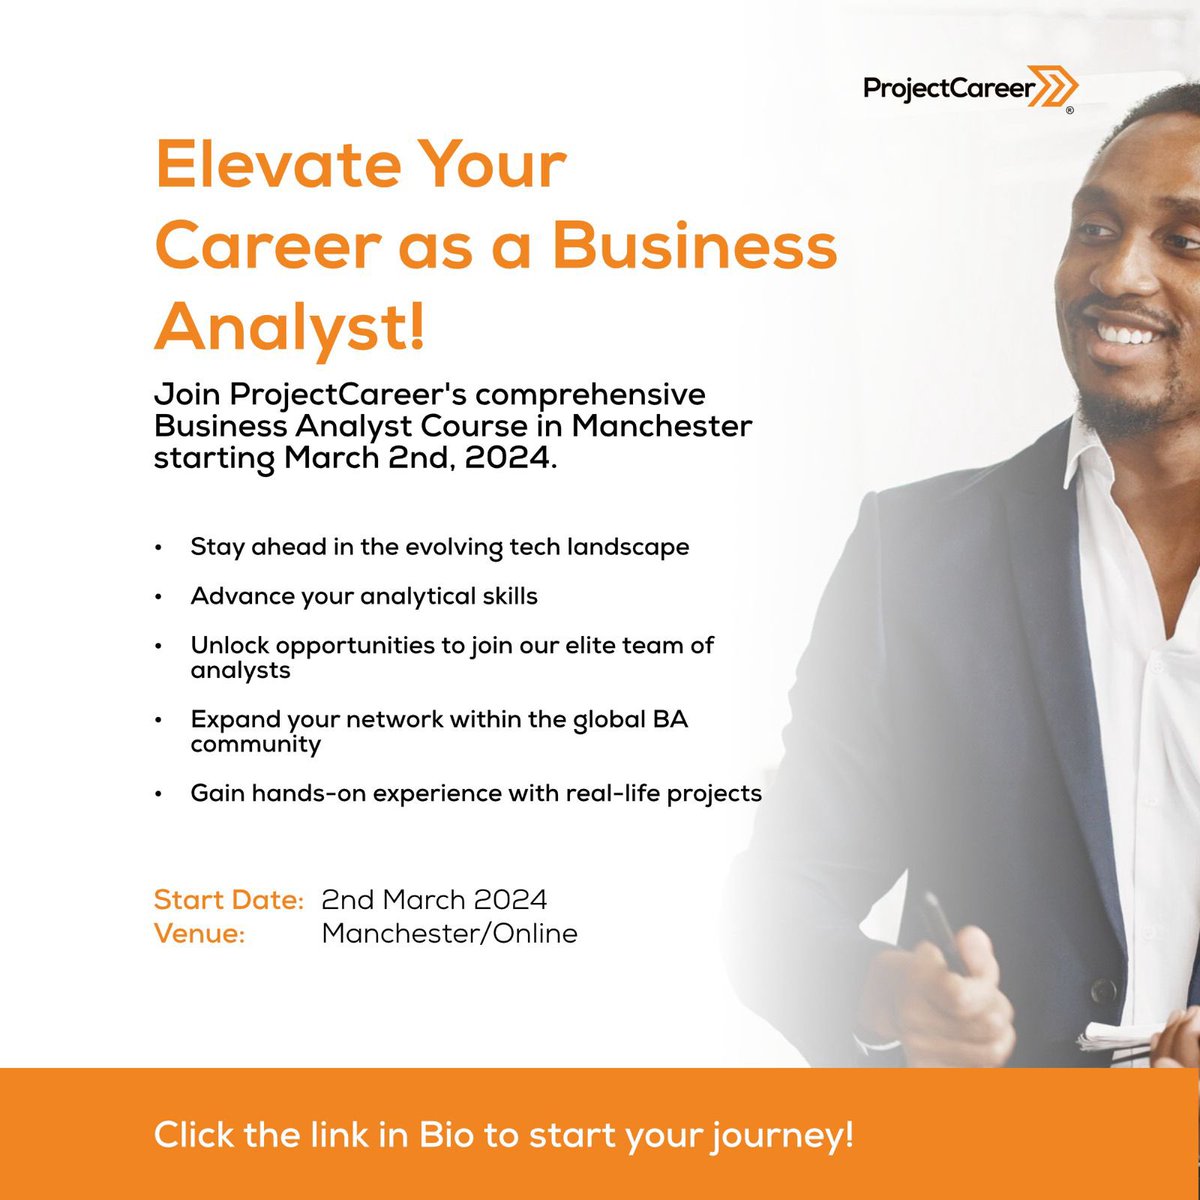 Transform your career and become a skilled Business Analyst! Join ProjectCareer’s dynamic course in Manchester starting March 2nd, 2024. Elevate your skills, connect with a global community, and open doors to exciting opportunities.

#BusinessAnalyst #CareerGrowth